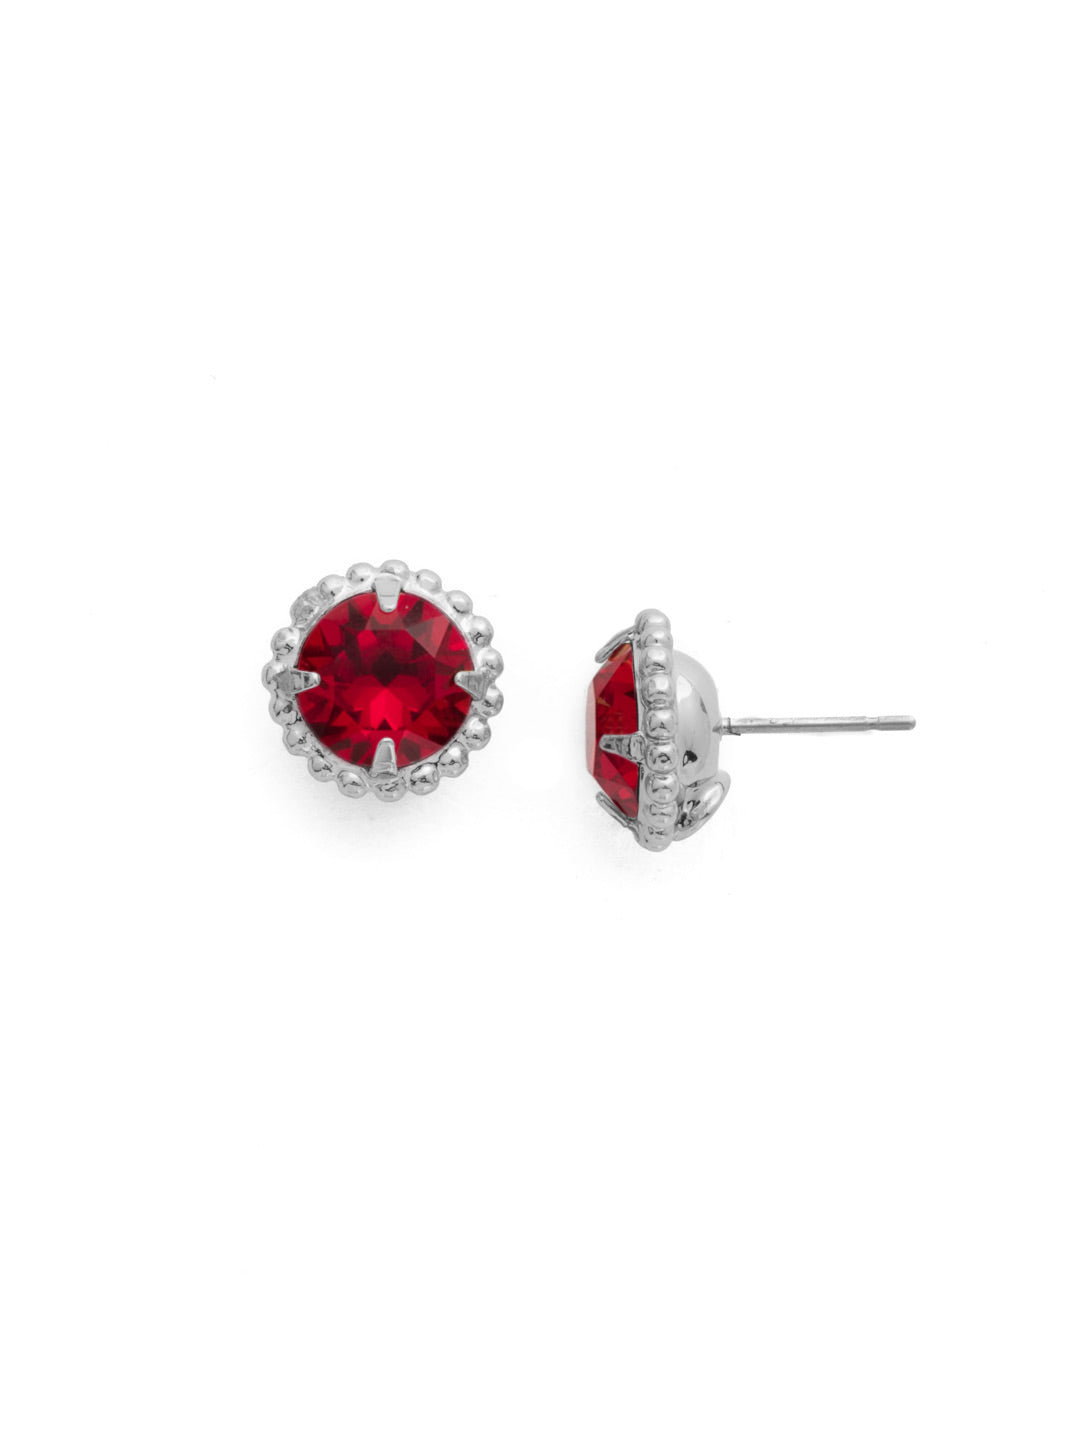 Simplicity Stud Earrings - EBY38PDSI - <p>A timeless classic, the Simplicity Stud Earrings feature round cut crystals in a variety of colors; accented with a halo of metal beaded detail. Need help picking a stud? <a href="https://www.sorrelli.com/blogs/sisterhood/round-stud-earrings-101-a-rundown-of-sizes-styles-and-sparkle">Check out our size guide!</a> From Sorrelli's Siam collection in our Palladium finish.</p>